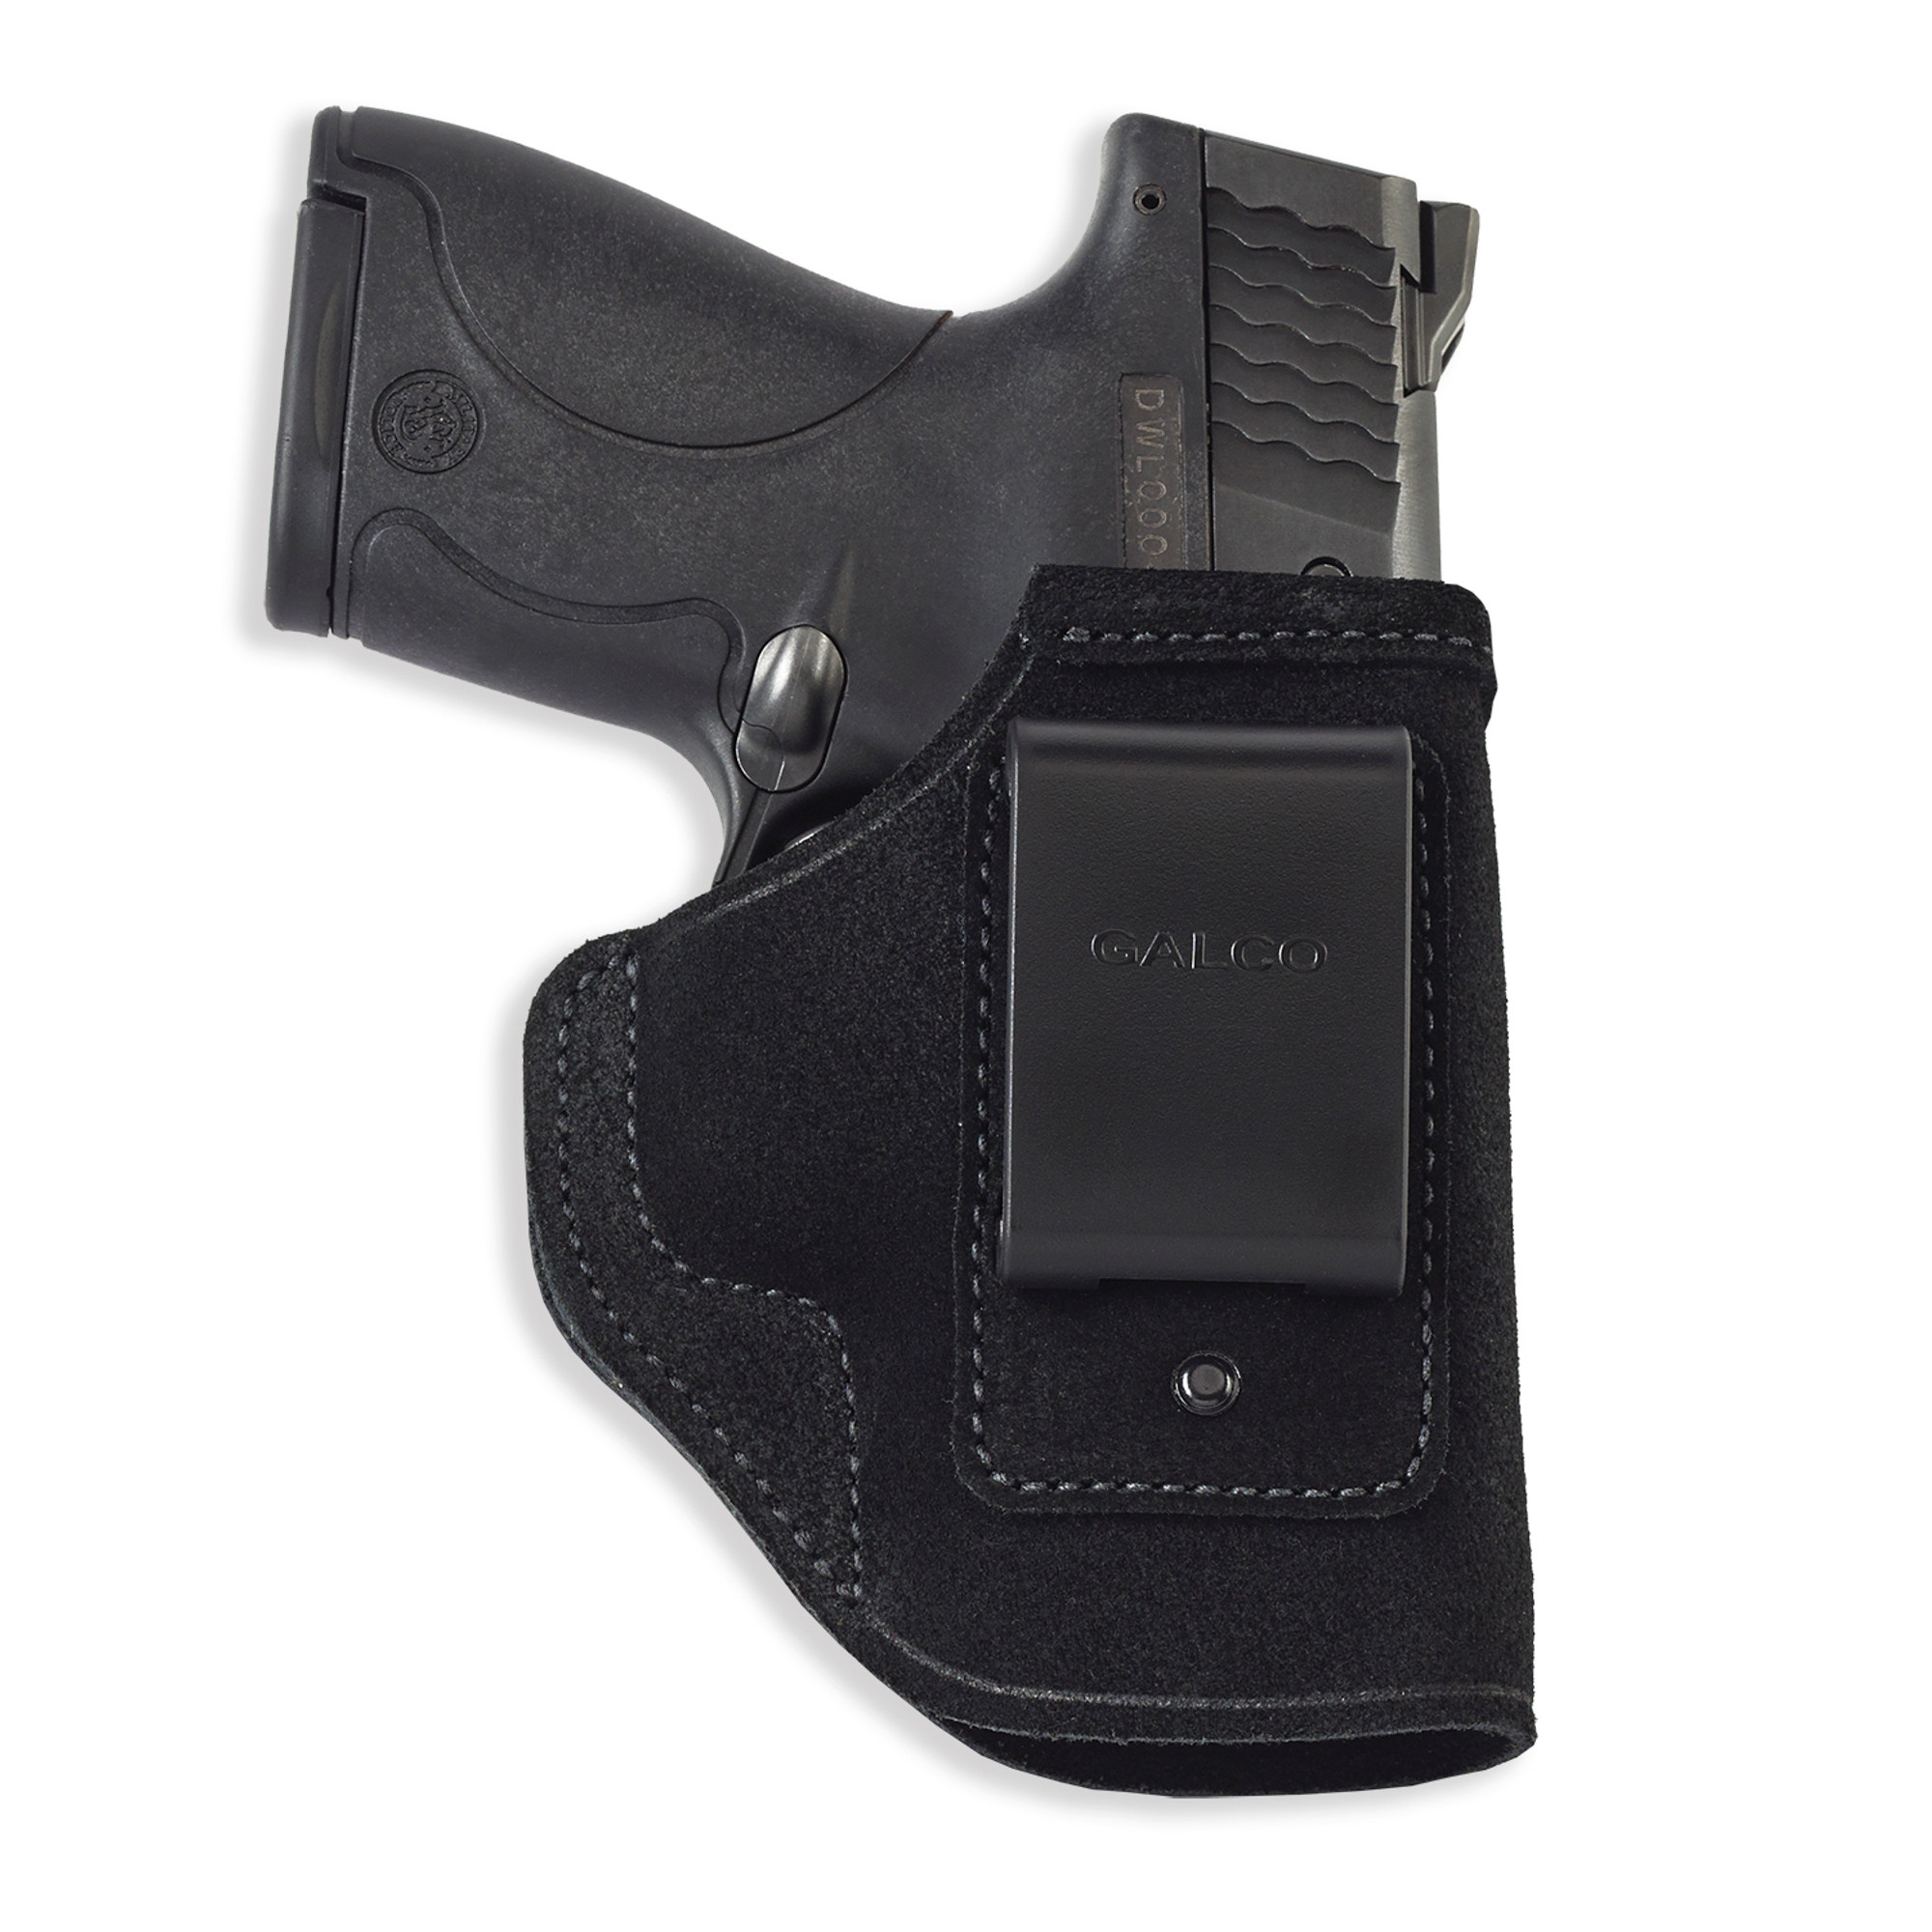 Stow-n-go Inside The Pant Holster - KRGAL-STO834B